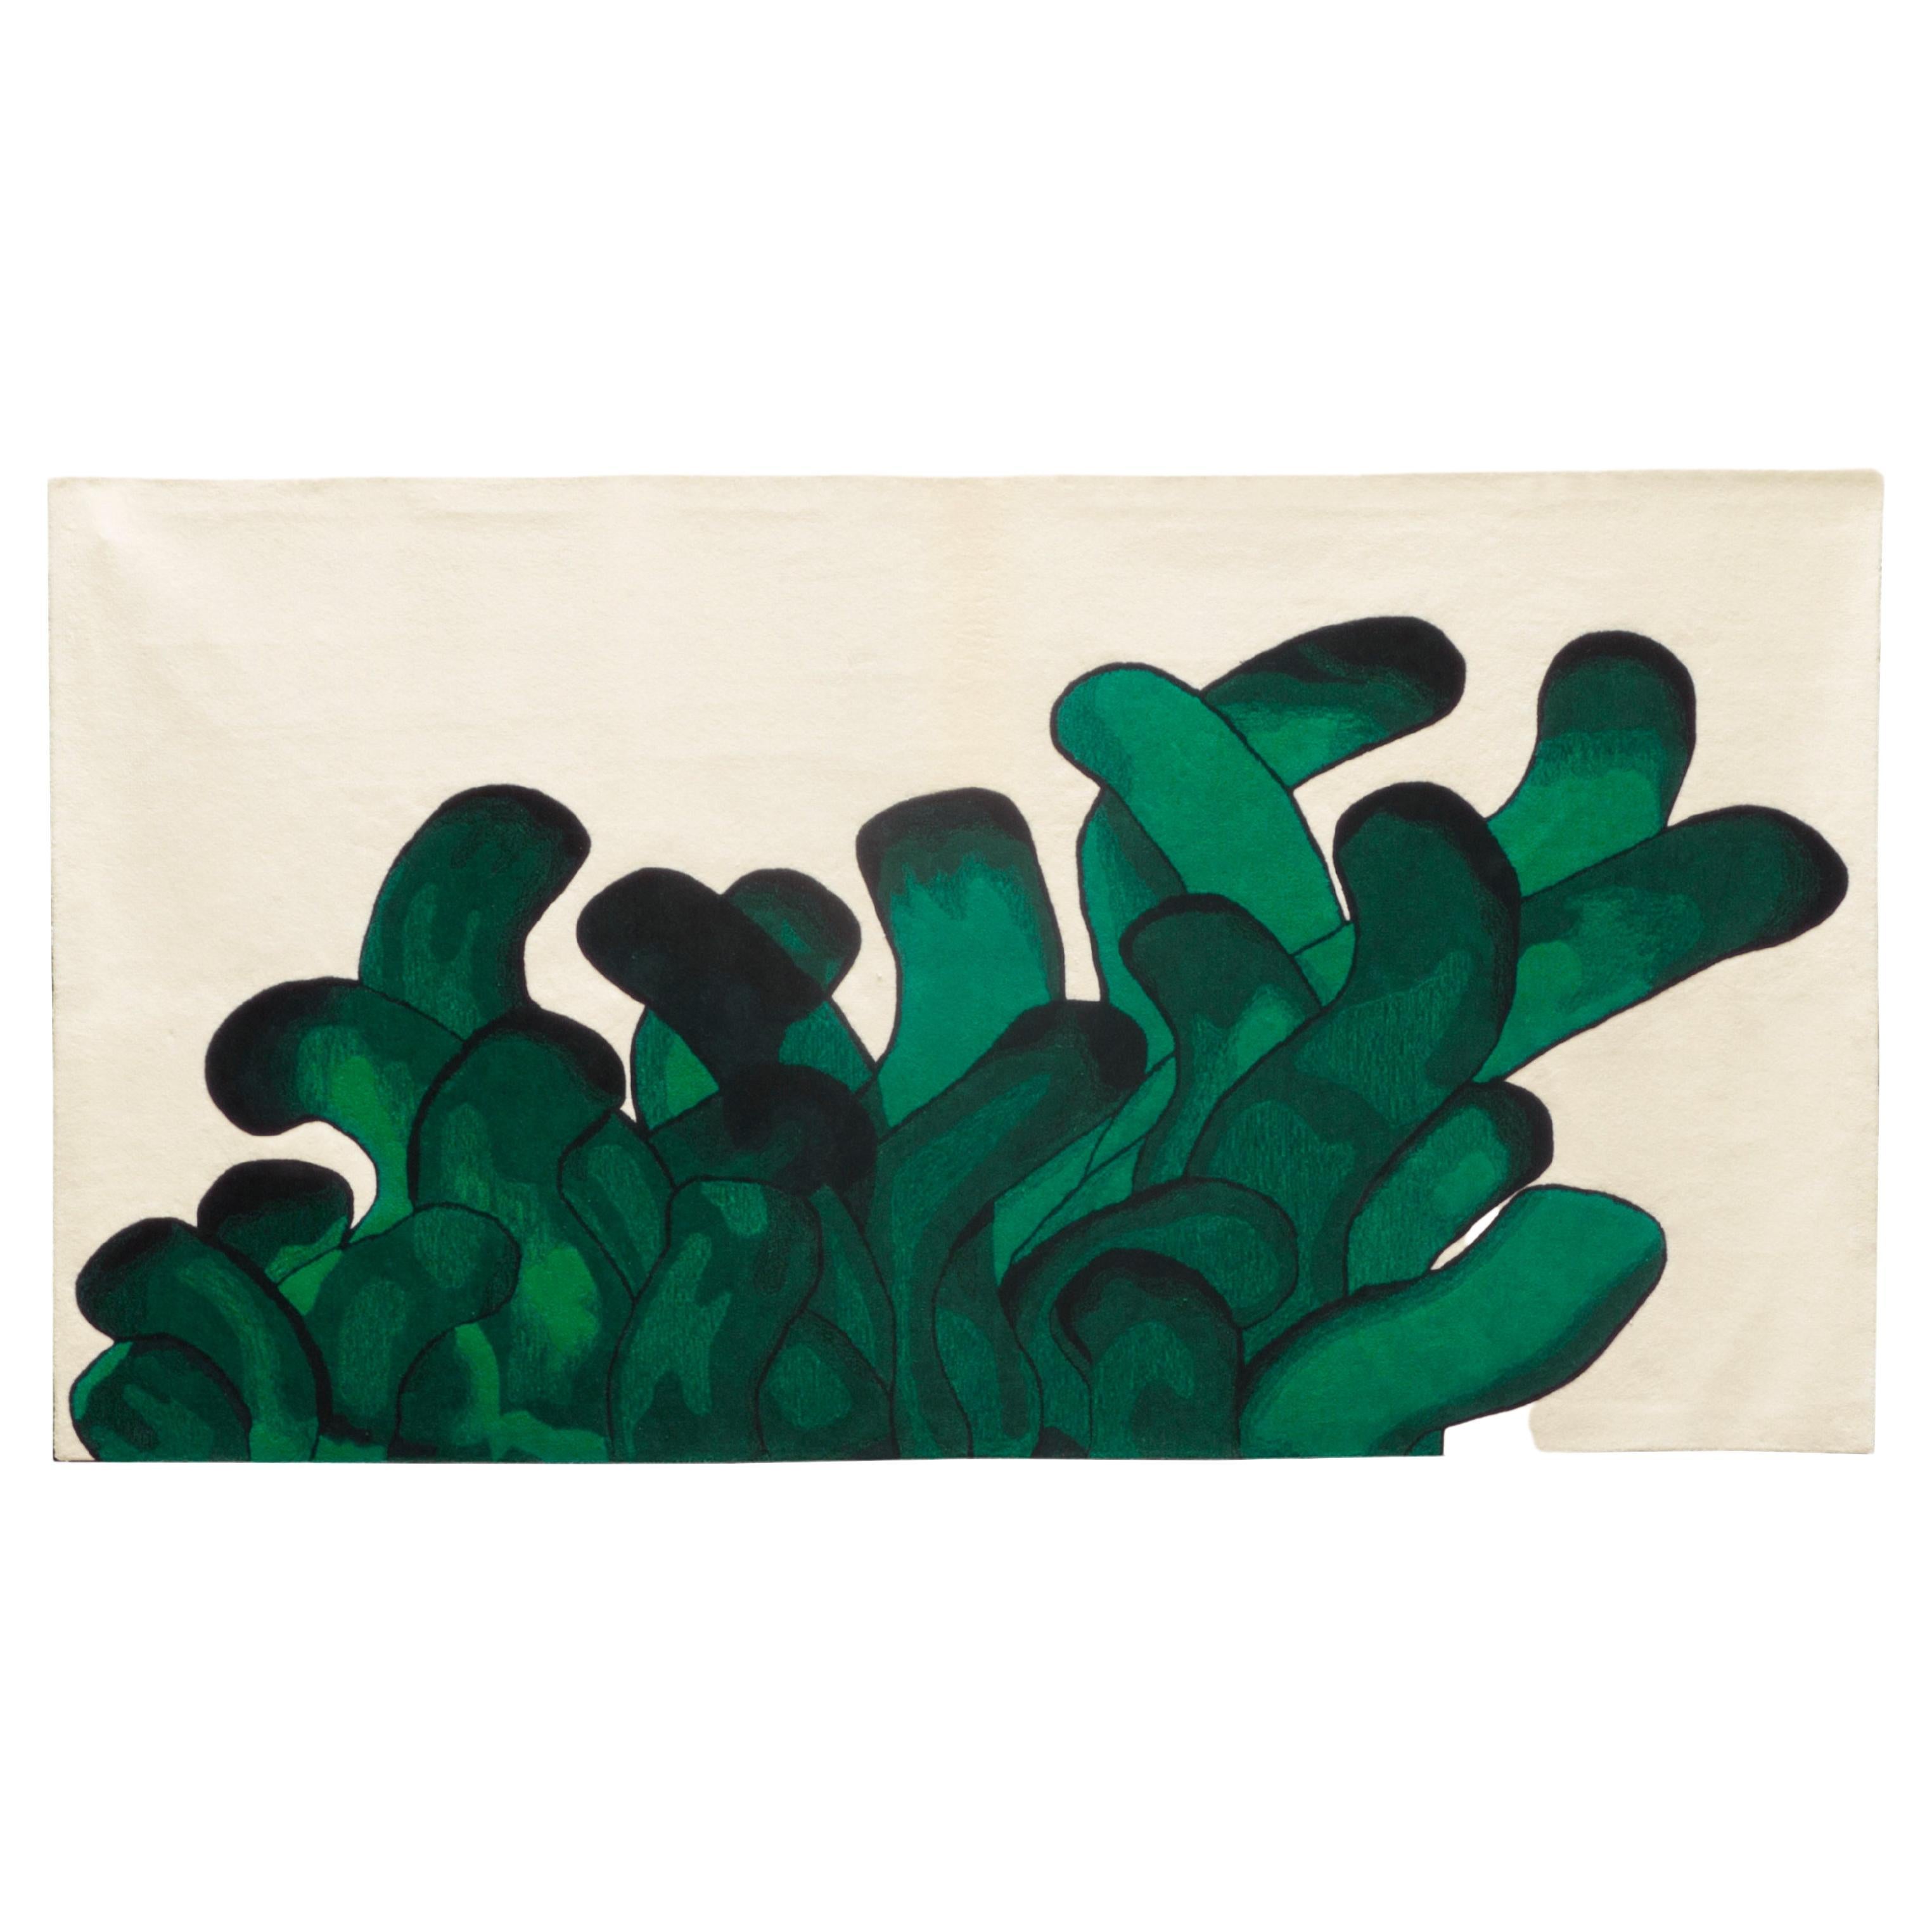 Green Anemone Rug by François Dumas for La Chance